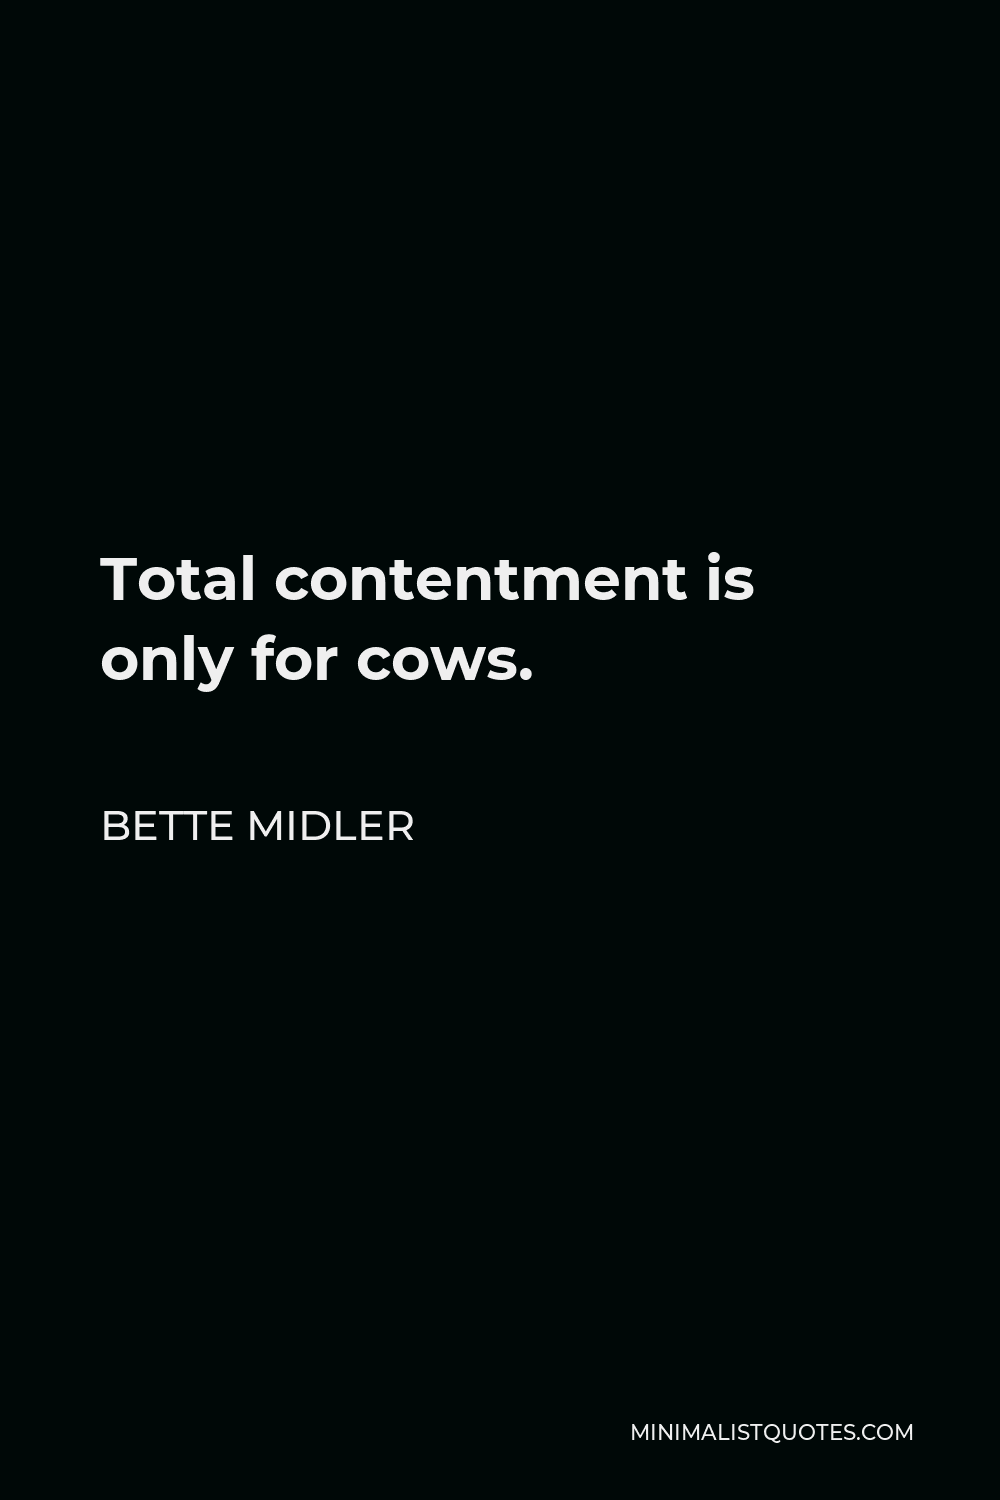 Bette Midler Quote - Total contentment is only for cows.